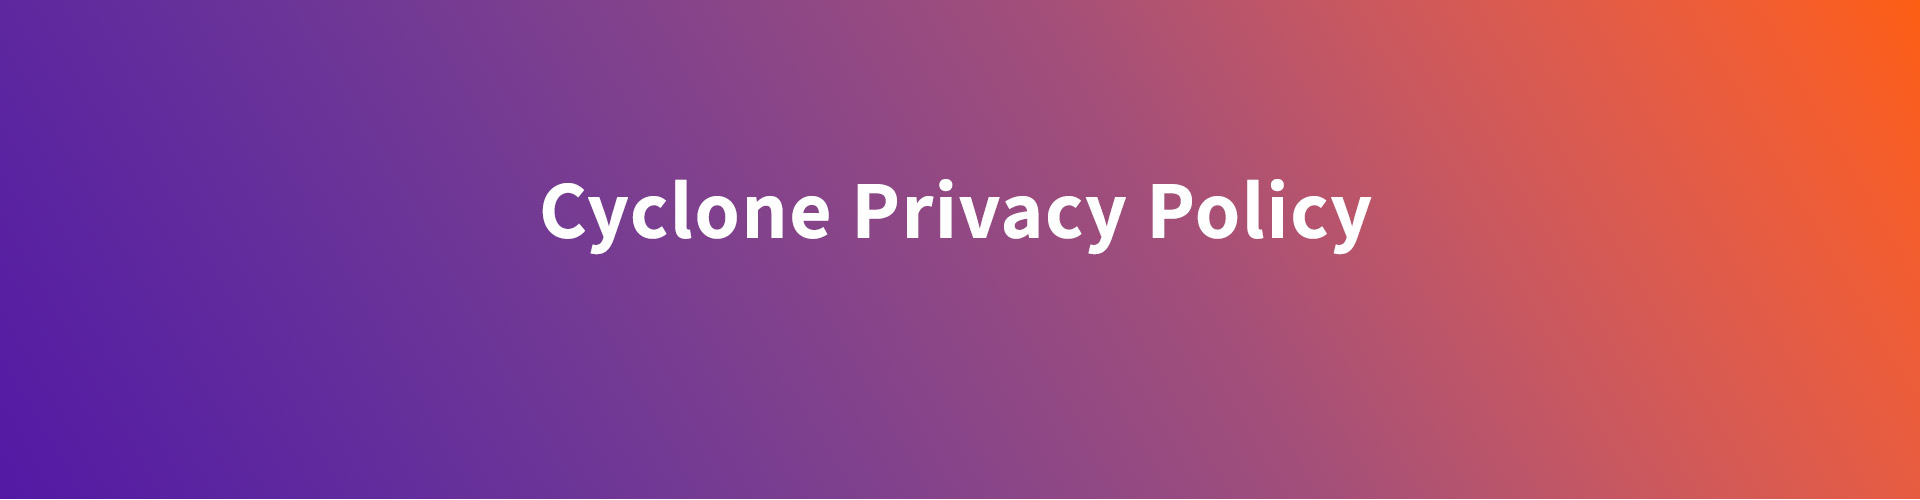 Cyclone Privacy Policy